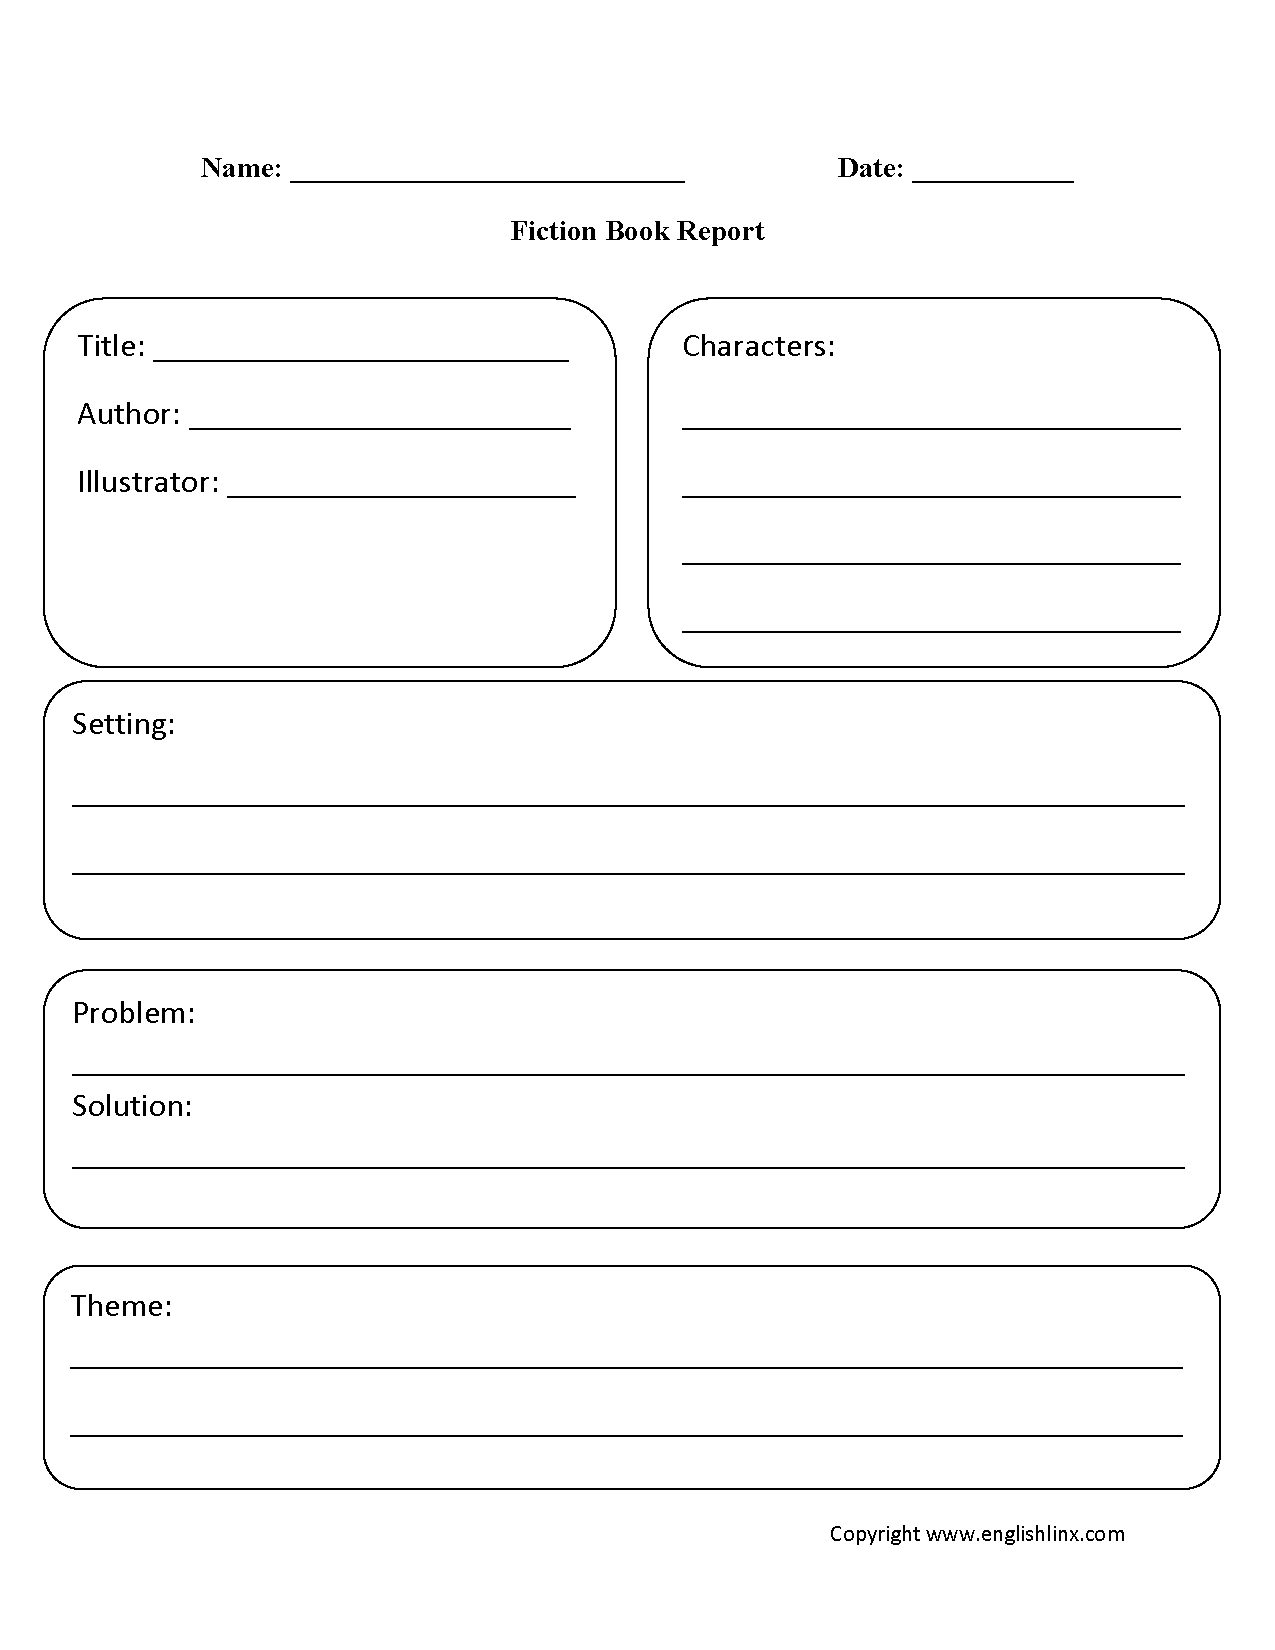 Englishlinx | Book Report Worksheets Intended For Biography Book Report Template